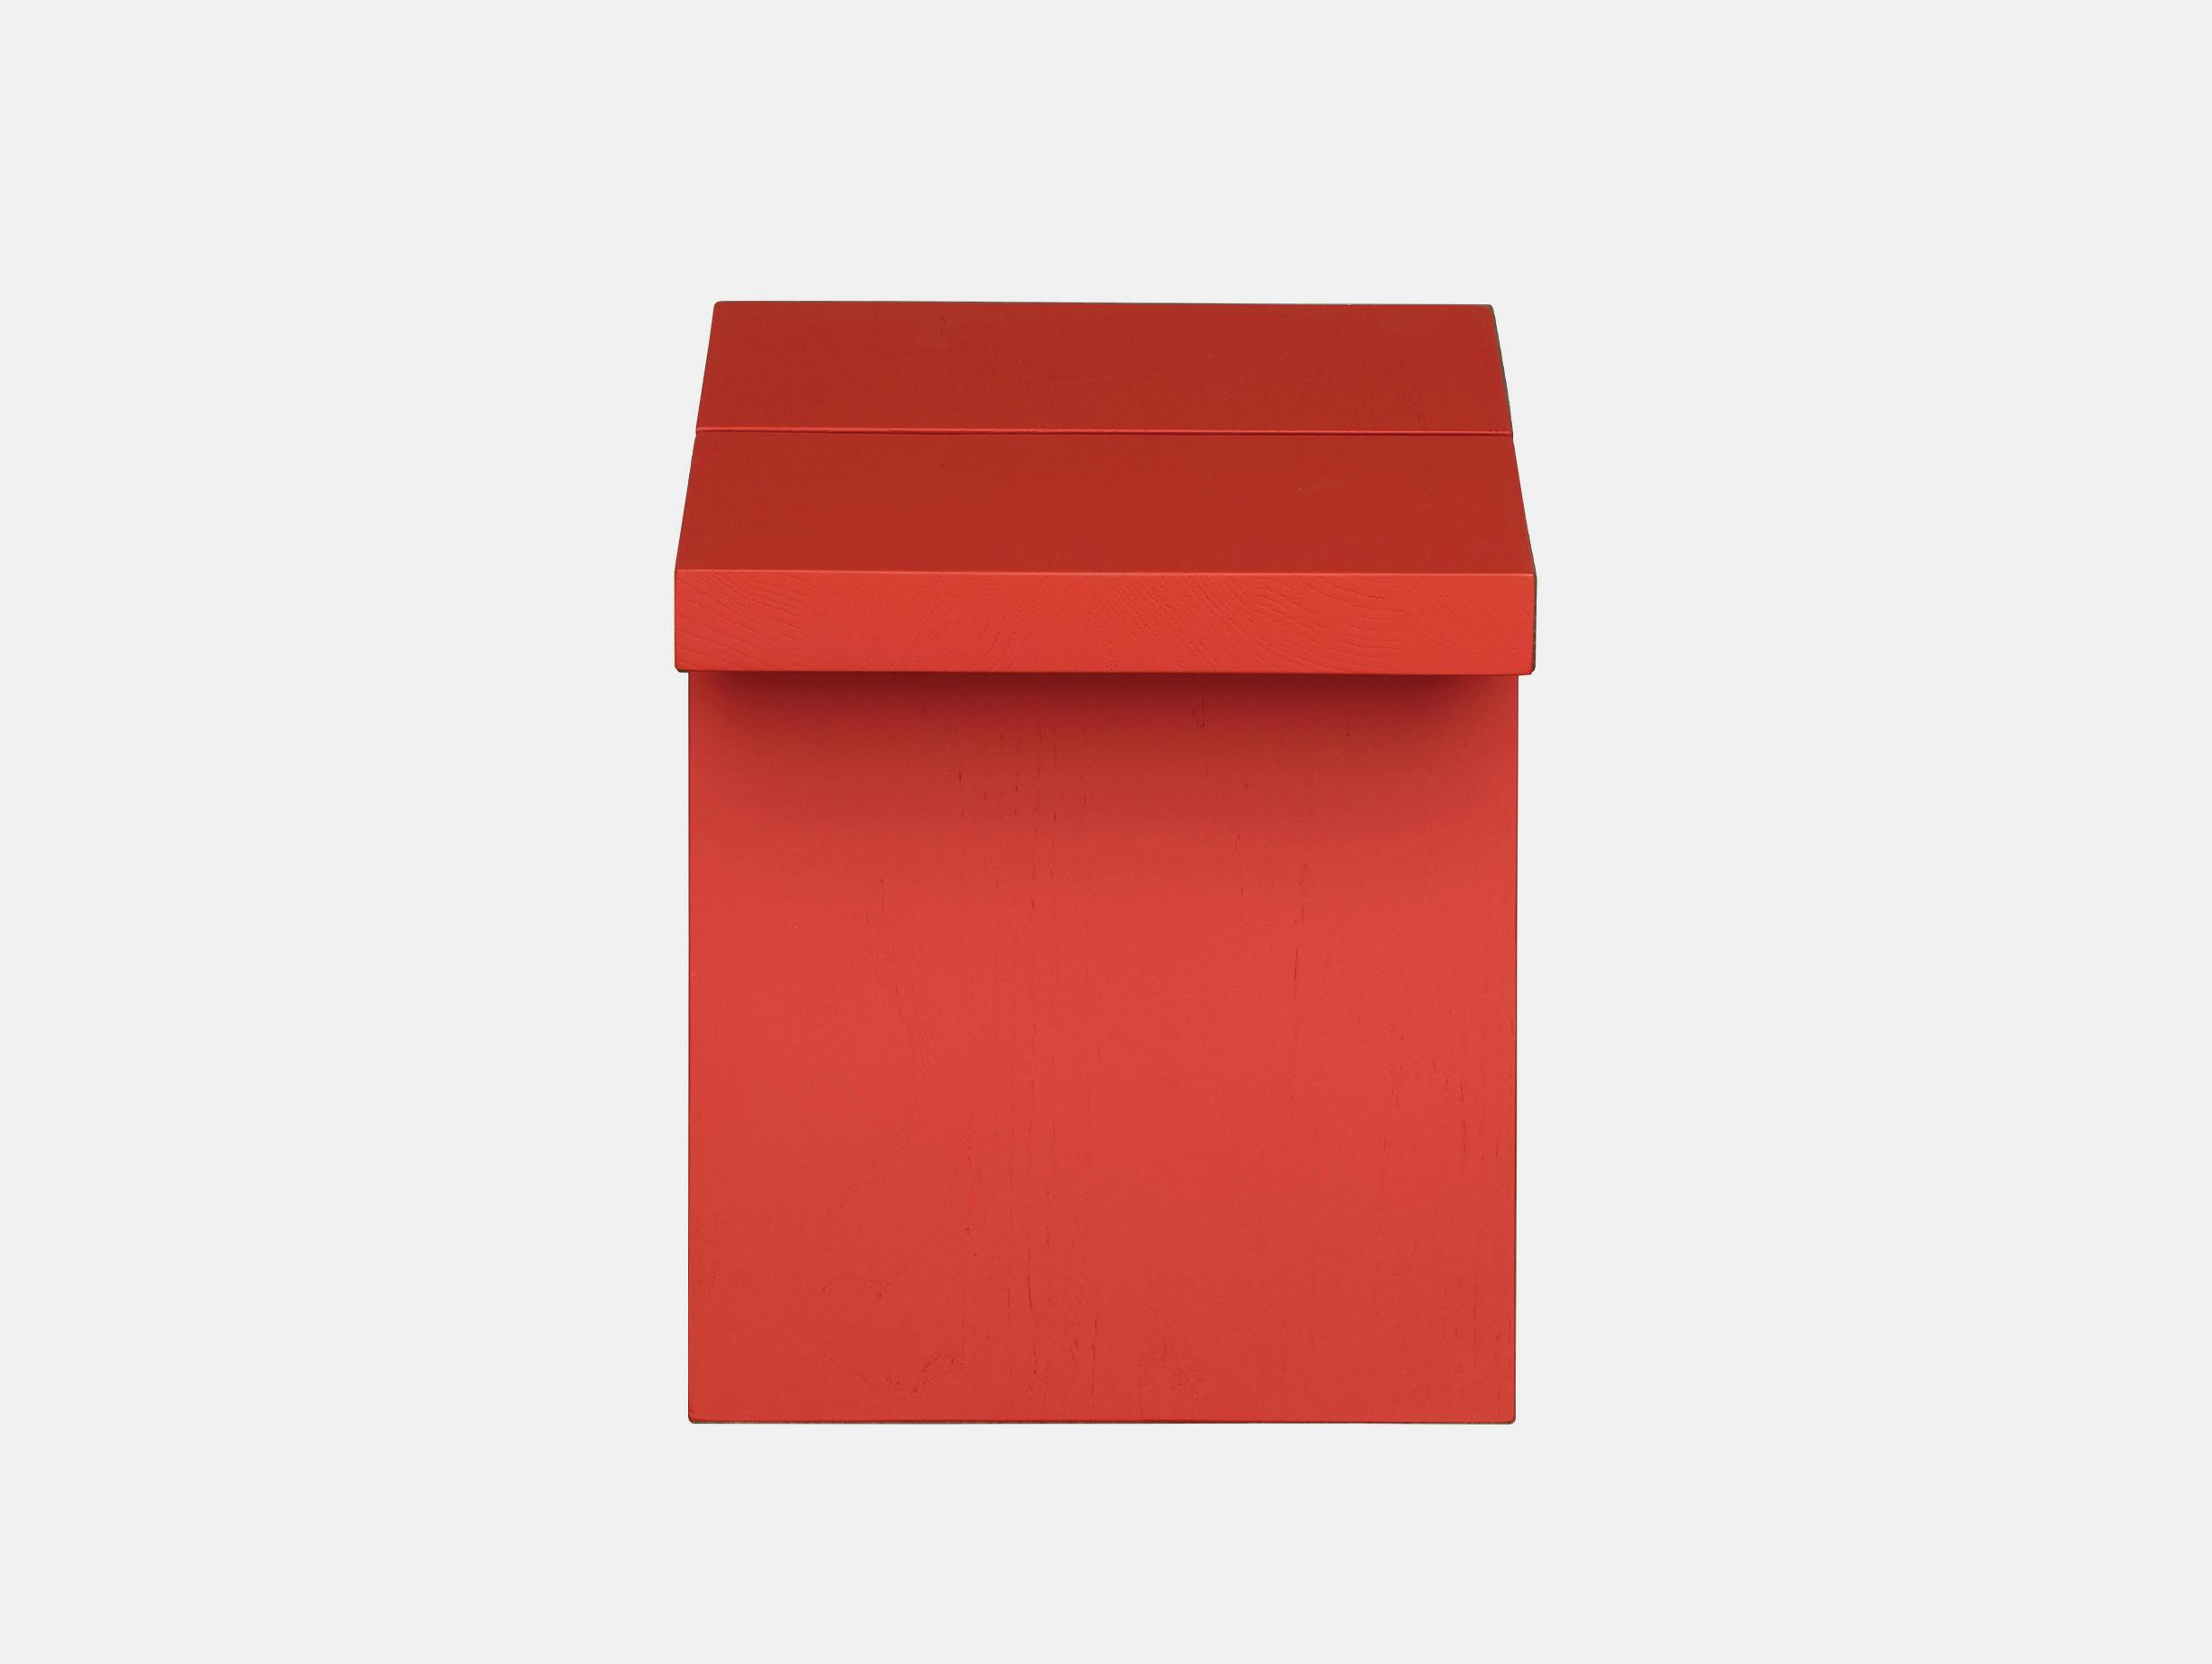 Fogia supersolid object 1 red stool 3